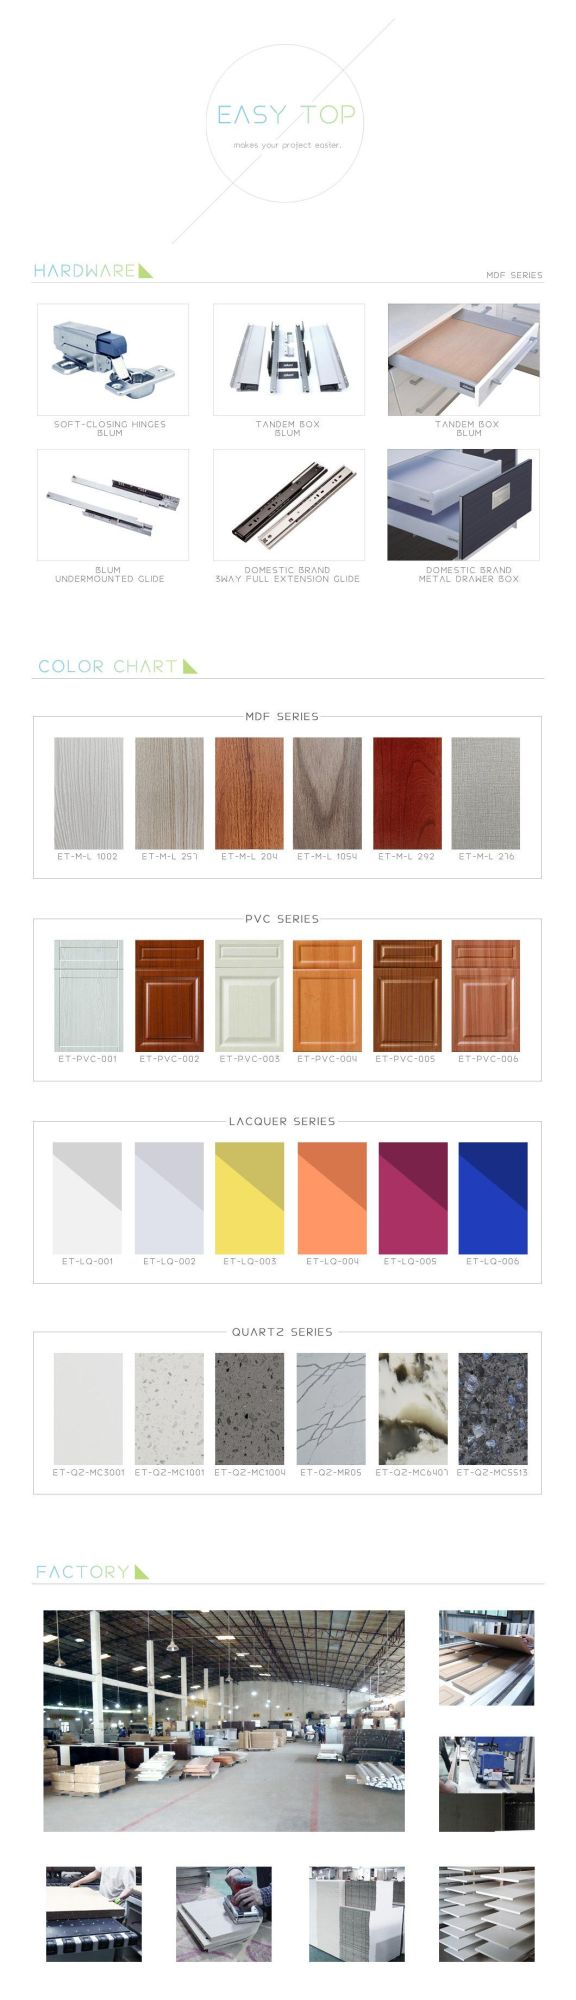 Renovation Extension Hot Sales White Double Swing Door Open Frame New Design Furiture Kitchen Cabinets Customized